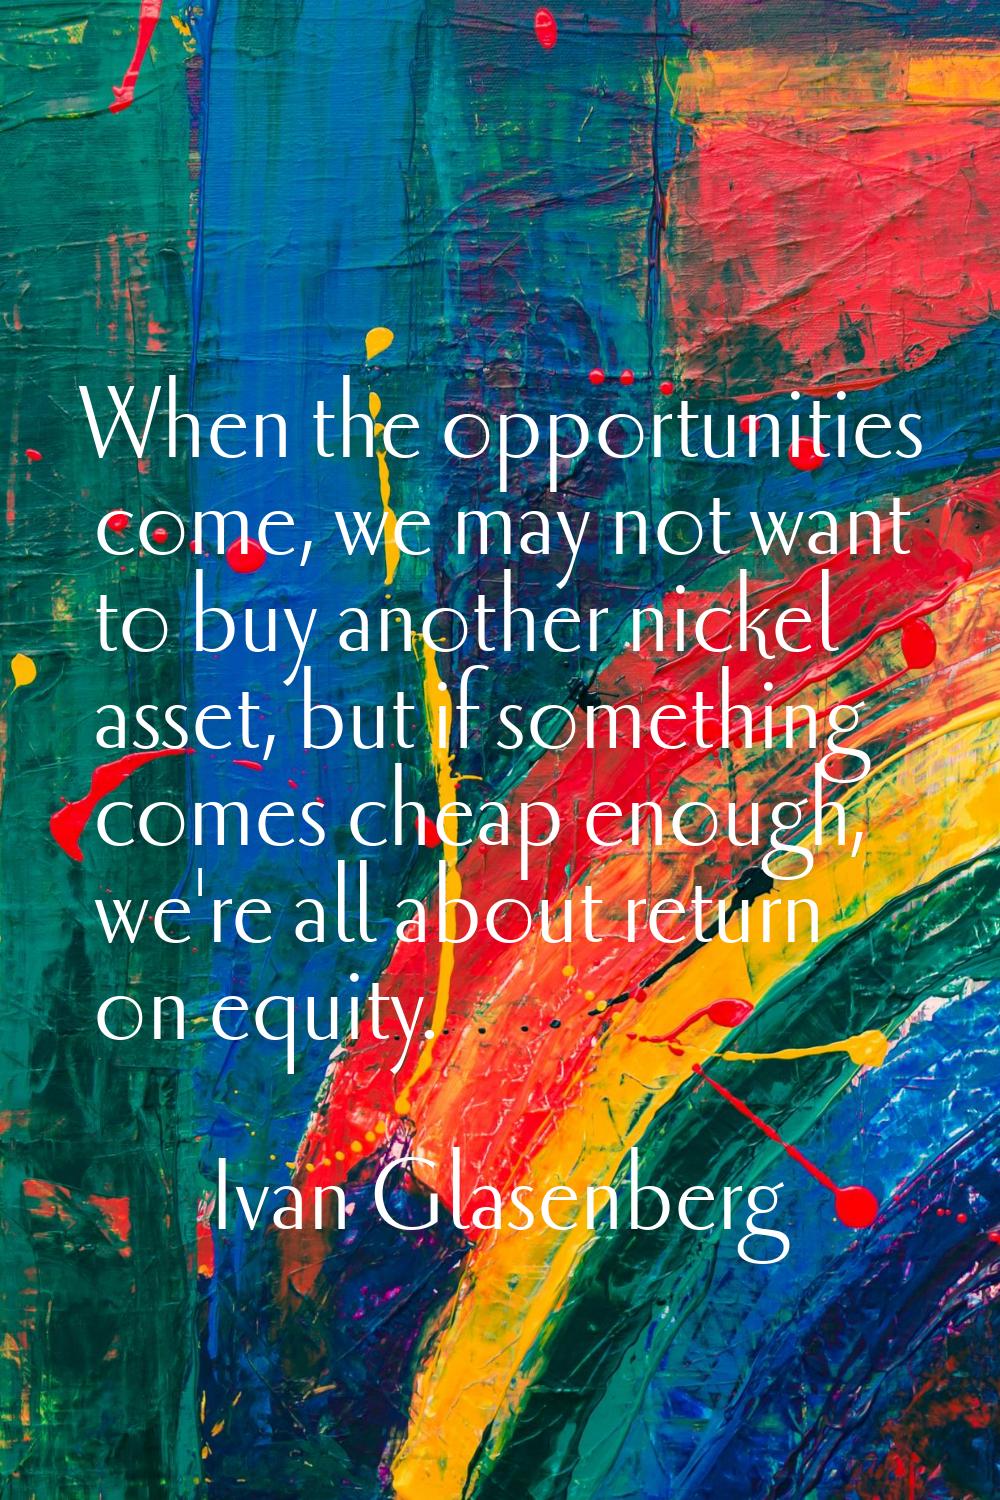 When the opportunities come, we may not want to buy another nickel asset, but if something comes ch